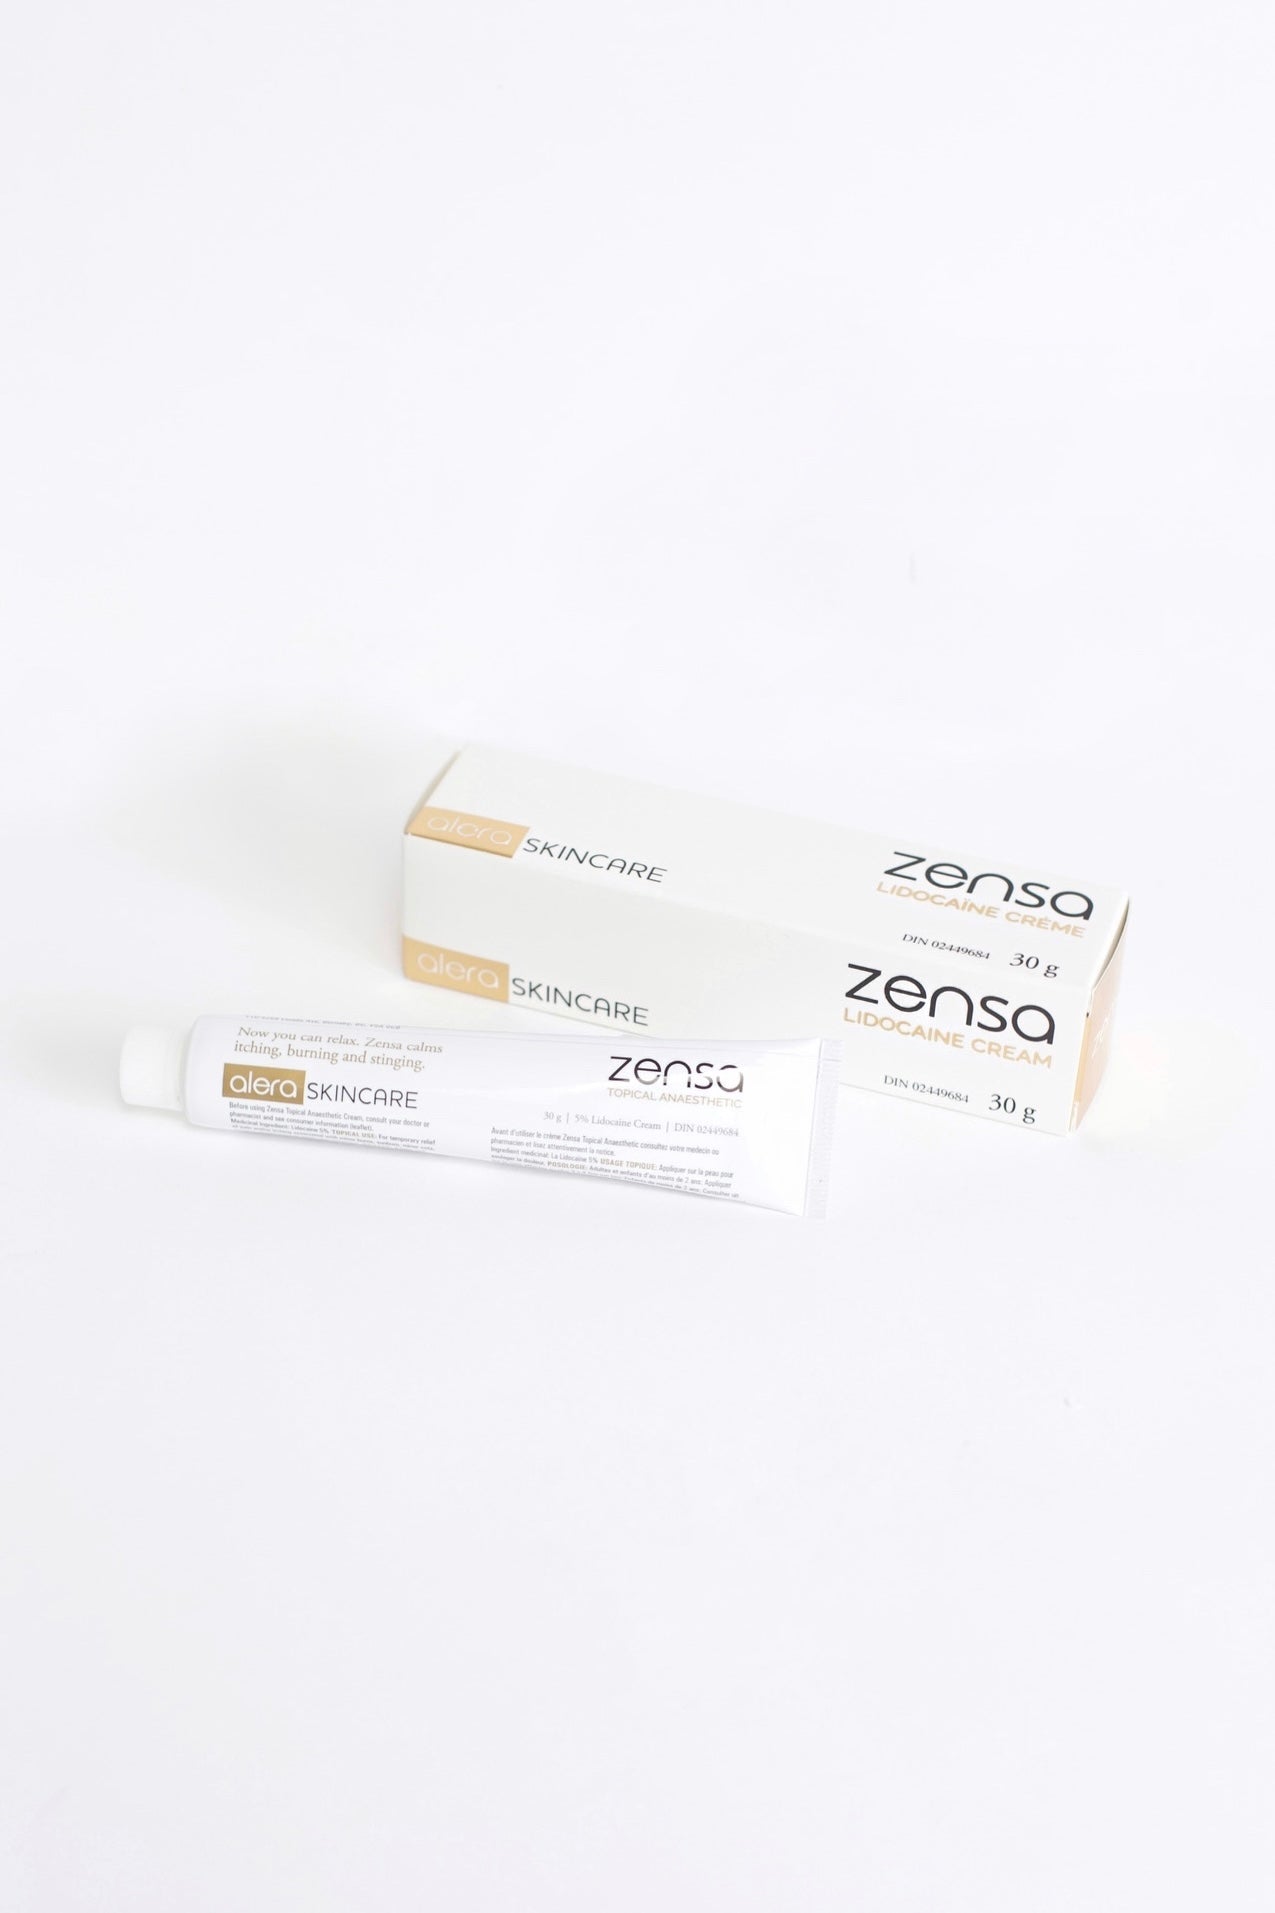 Zensa Numbing Cream is formulated with Vitamin E Oil to directly benefit  skin health Vitamin E Oil promotes wound healing and reduces  Instagram